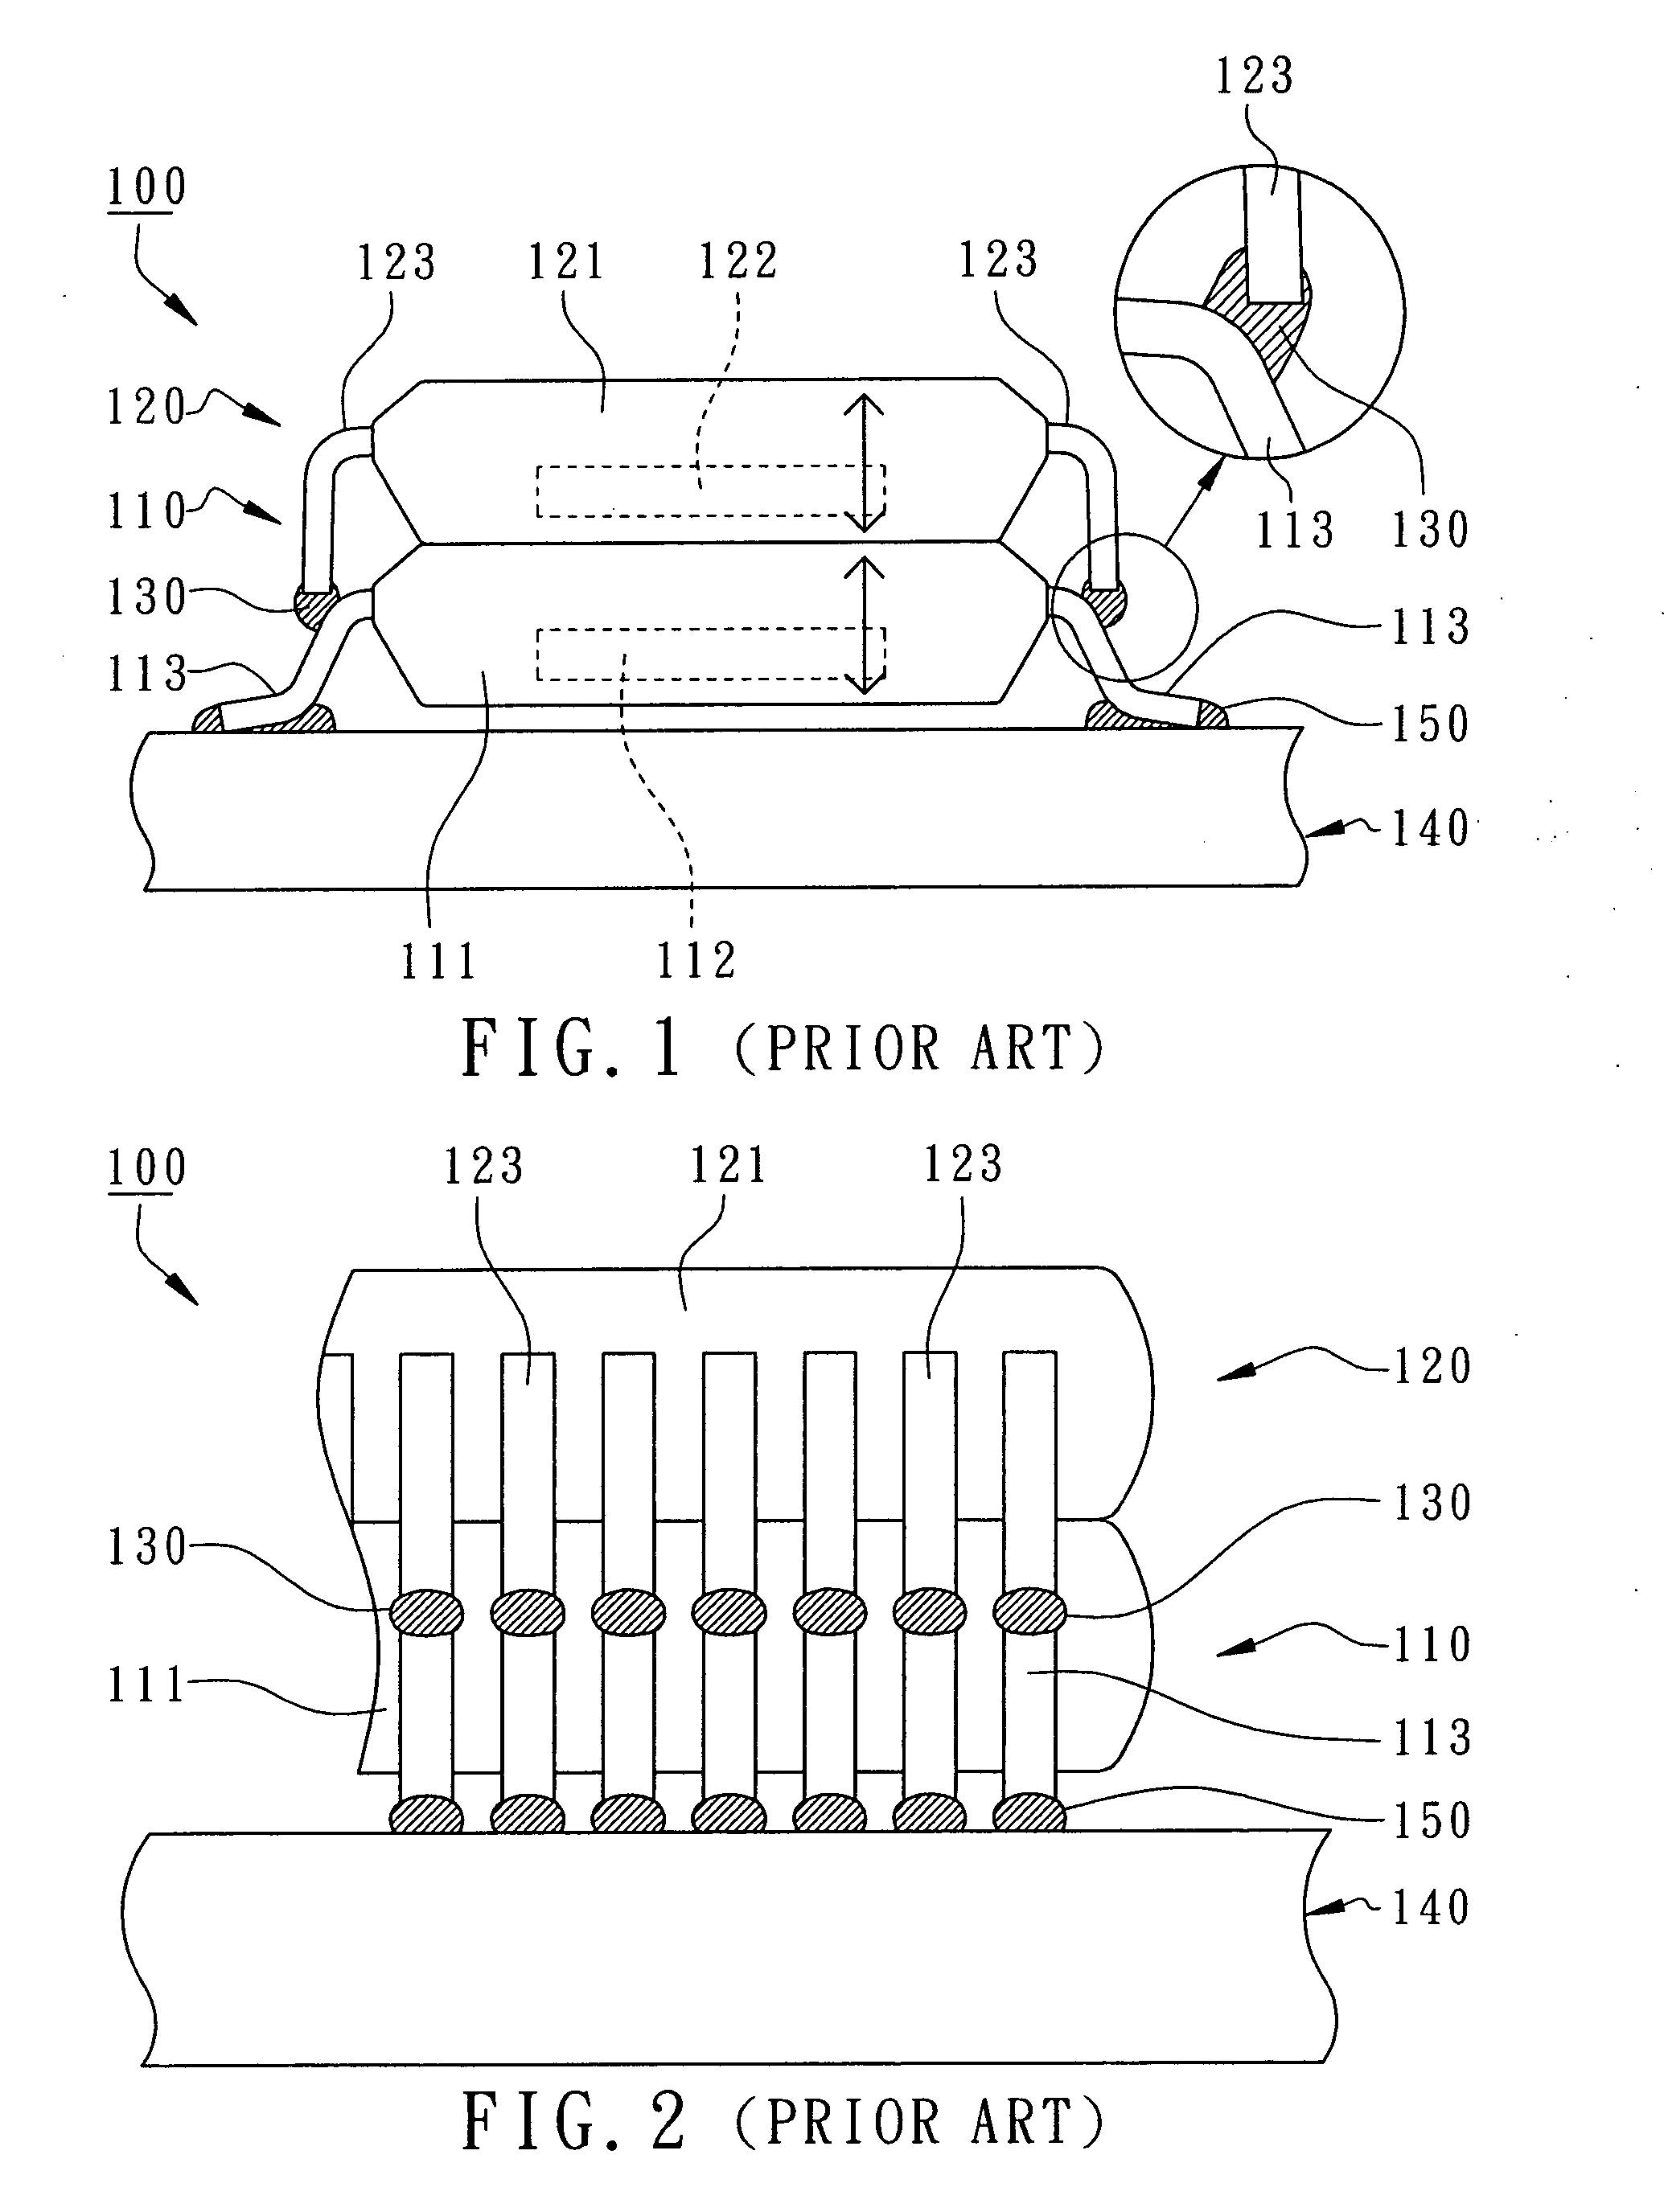 POP (Package-On-Package) device encapsulating soldered joints between externals leads